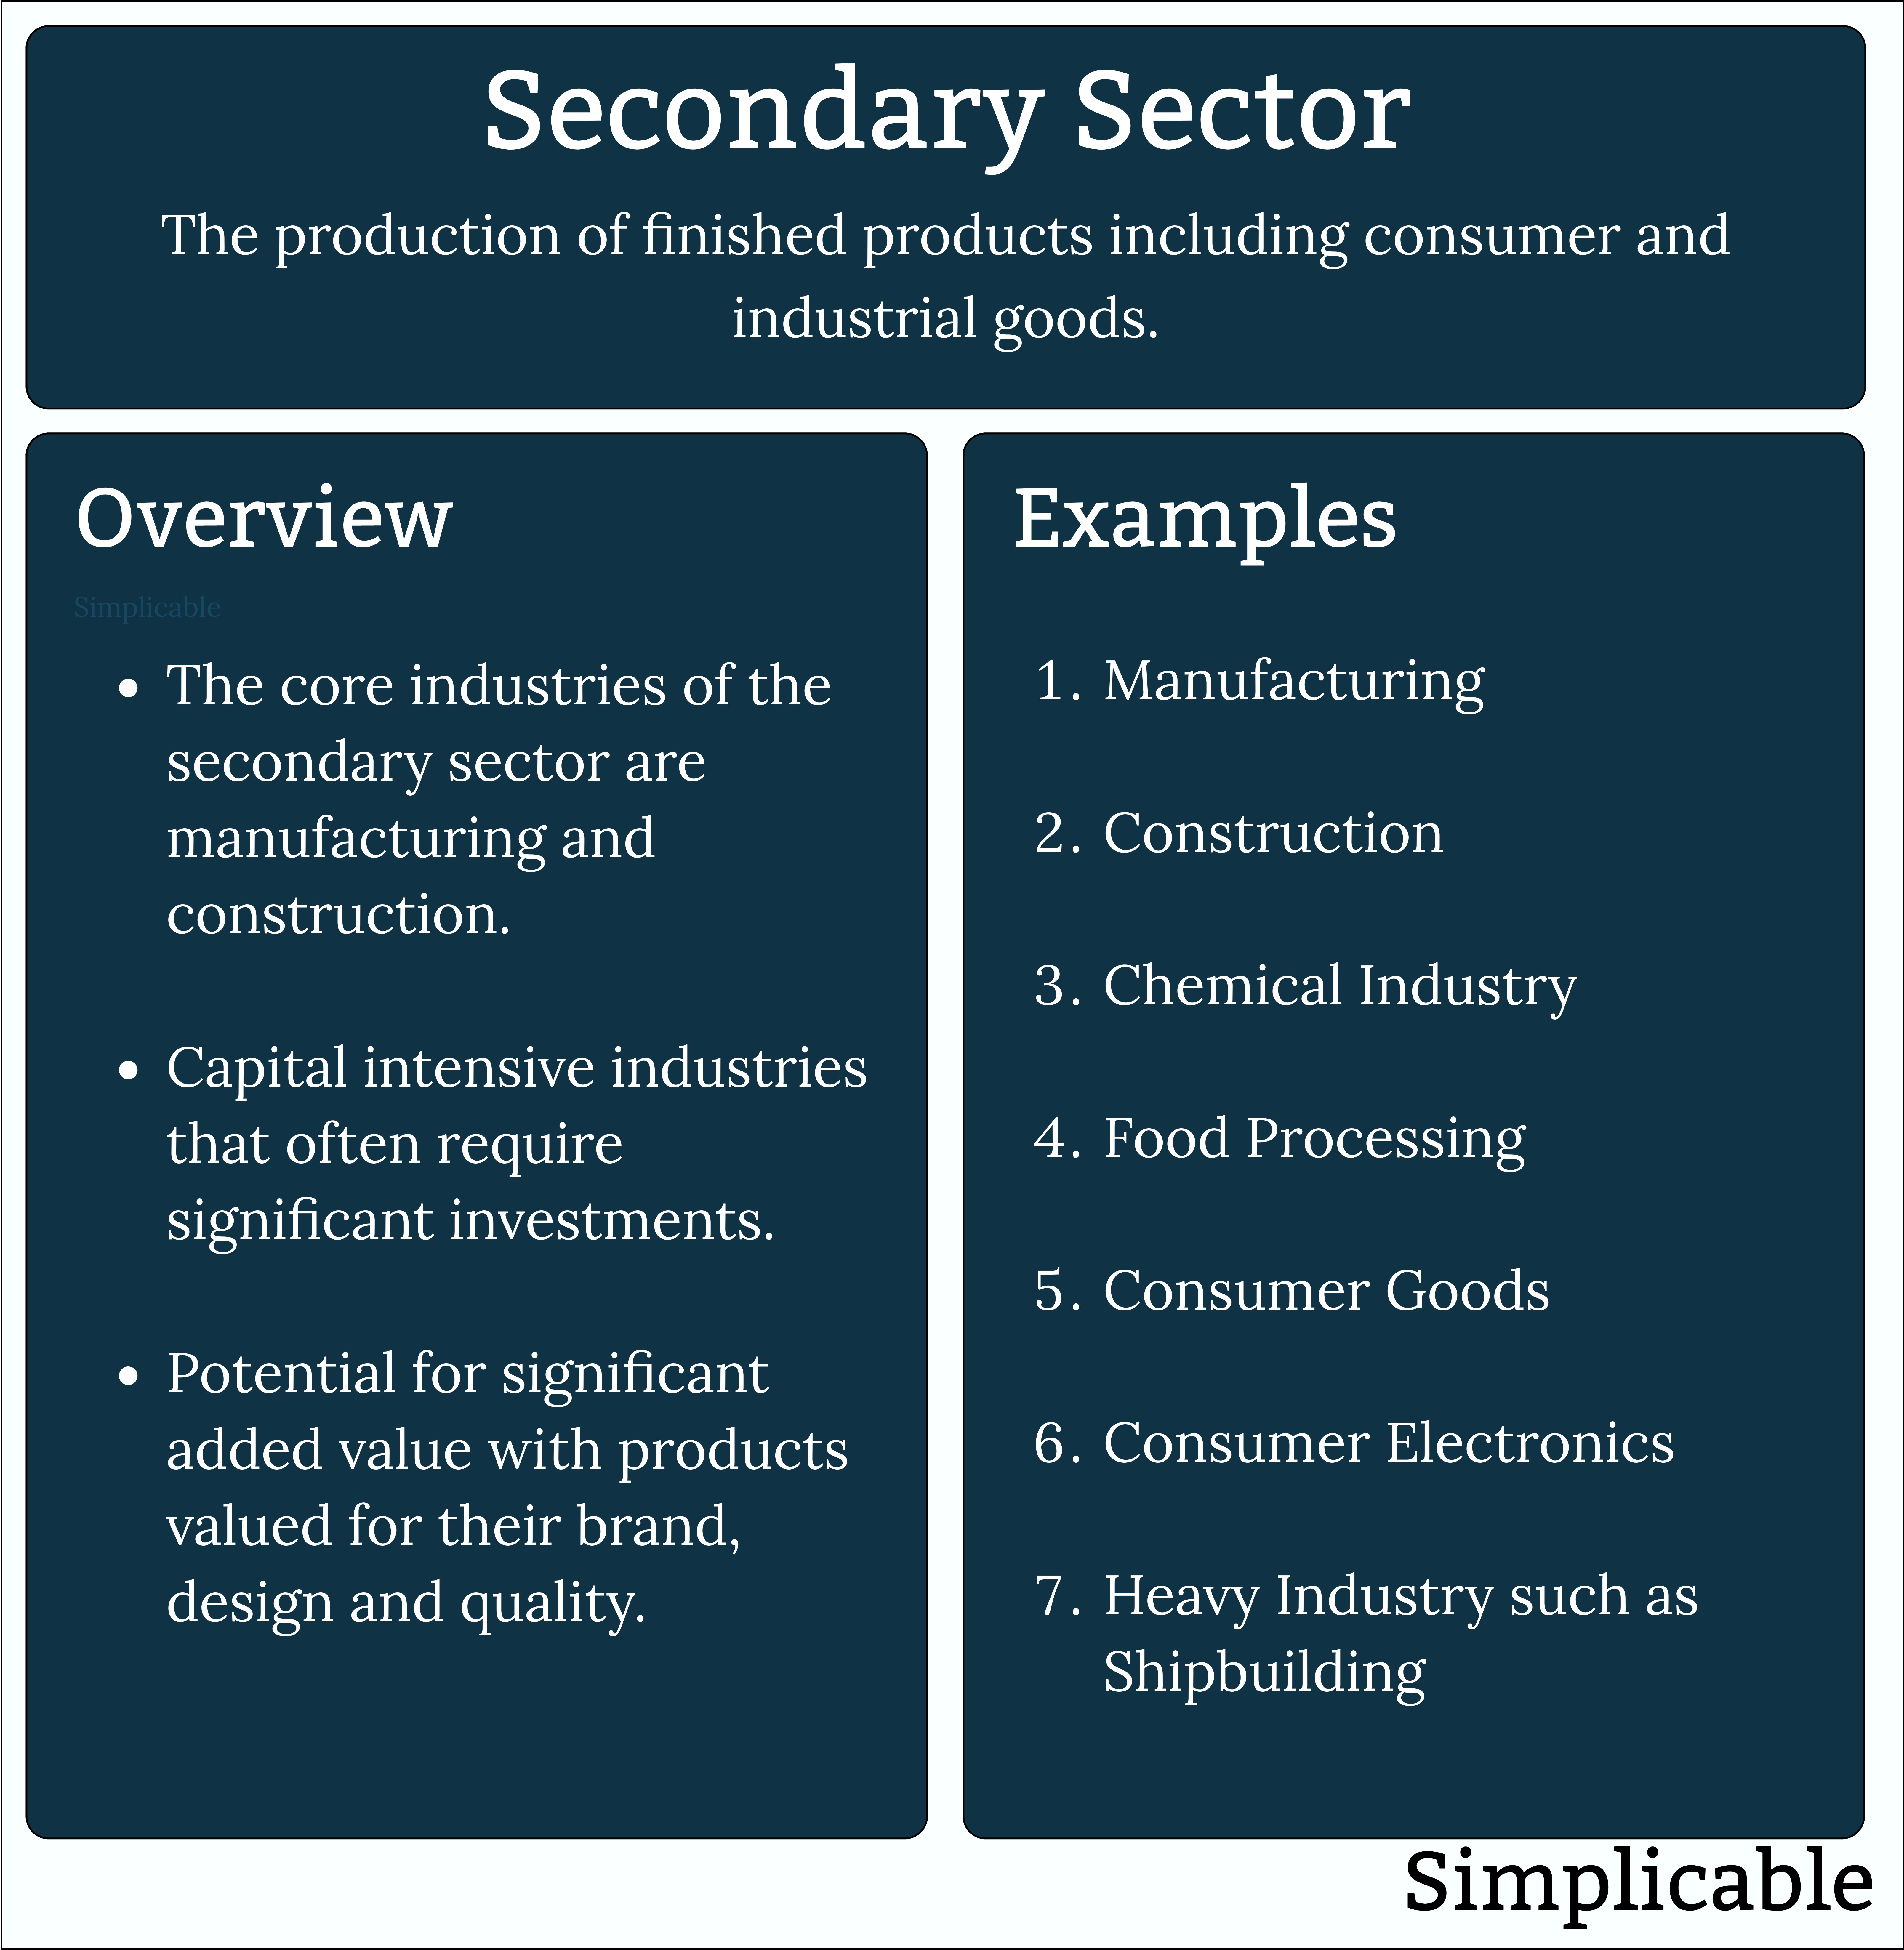 secondary sector overview and examples